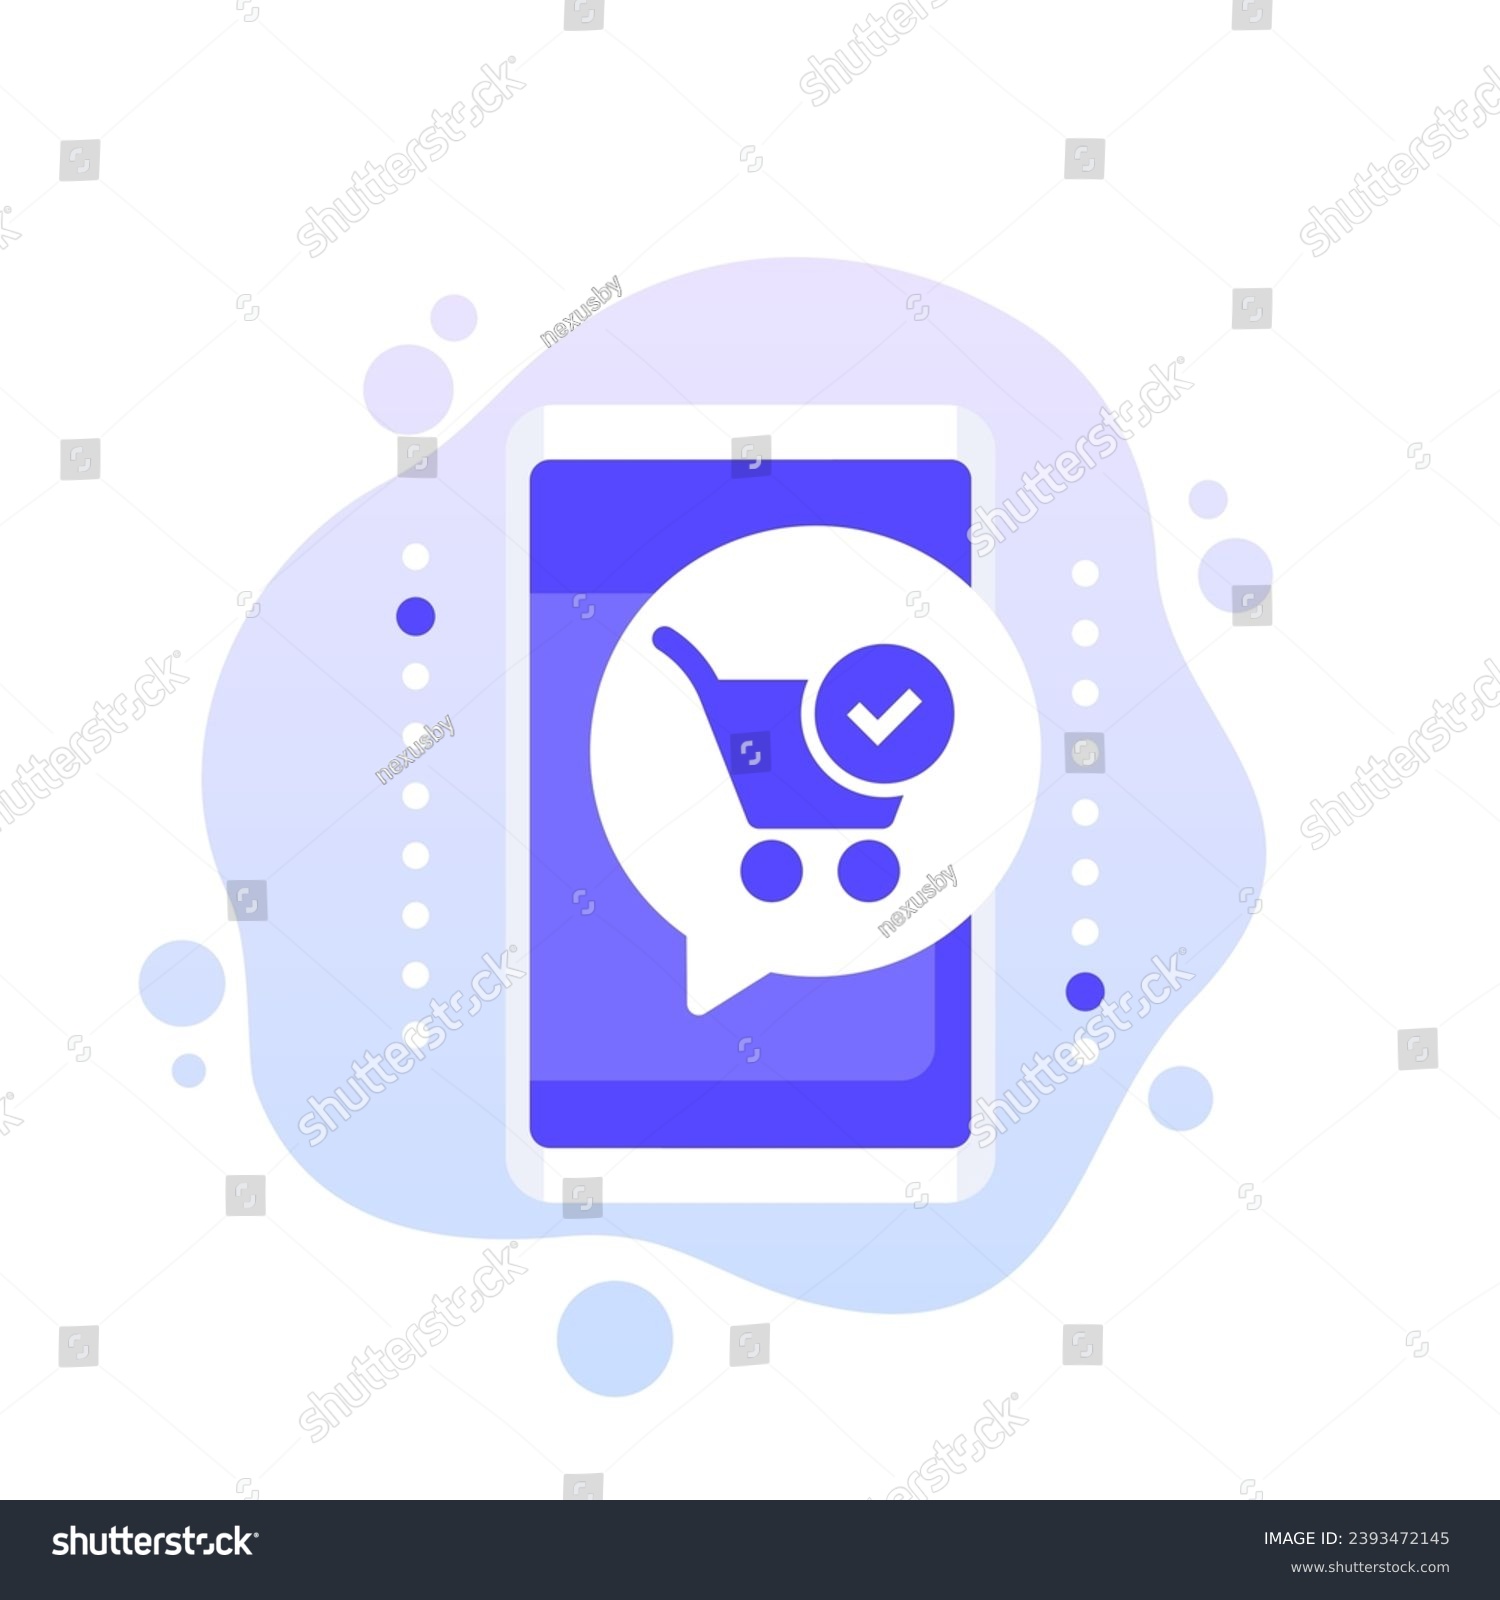 SVG of completed order icon with shopping cart and smart phone svg